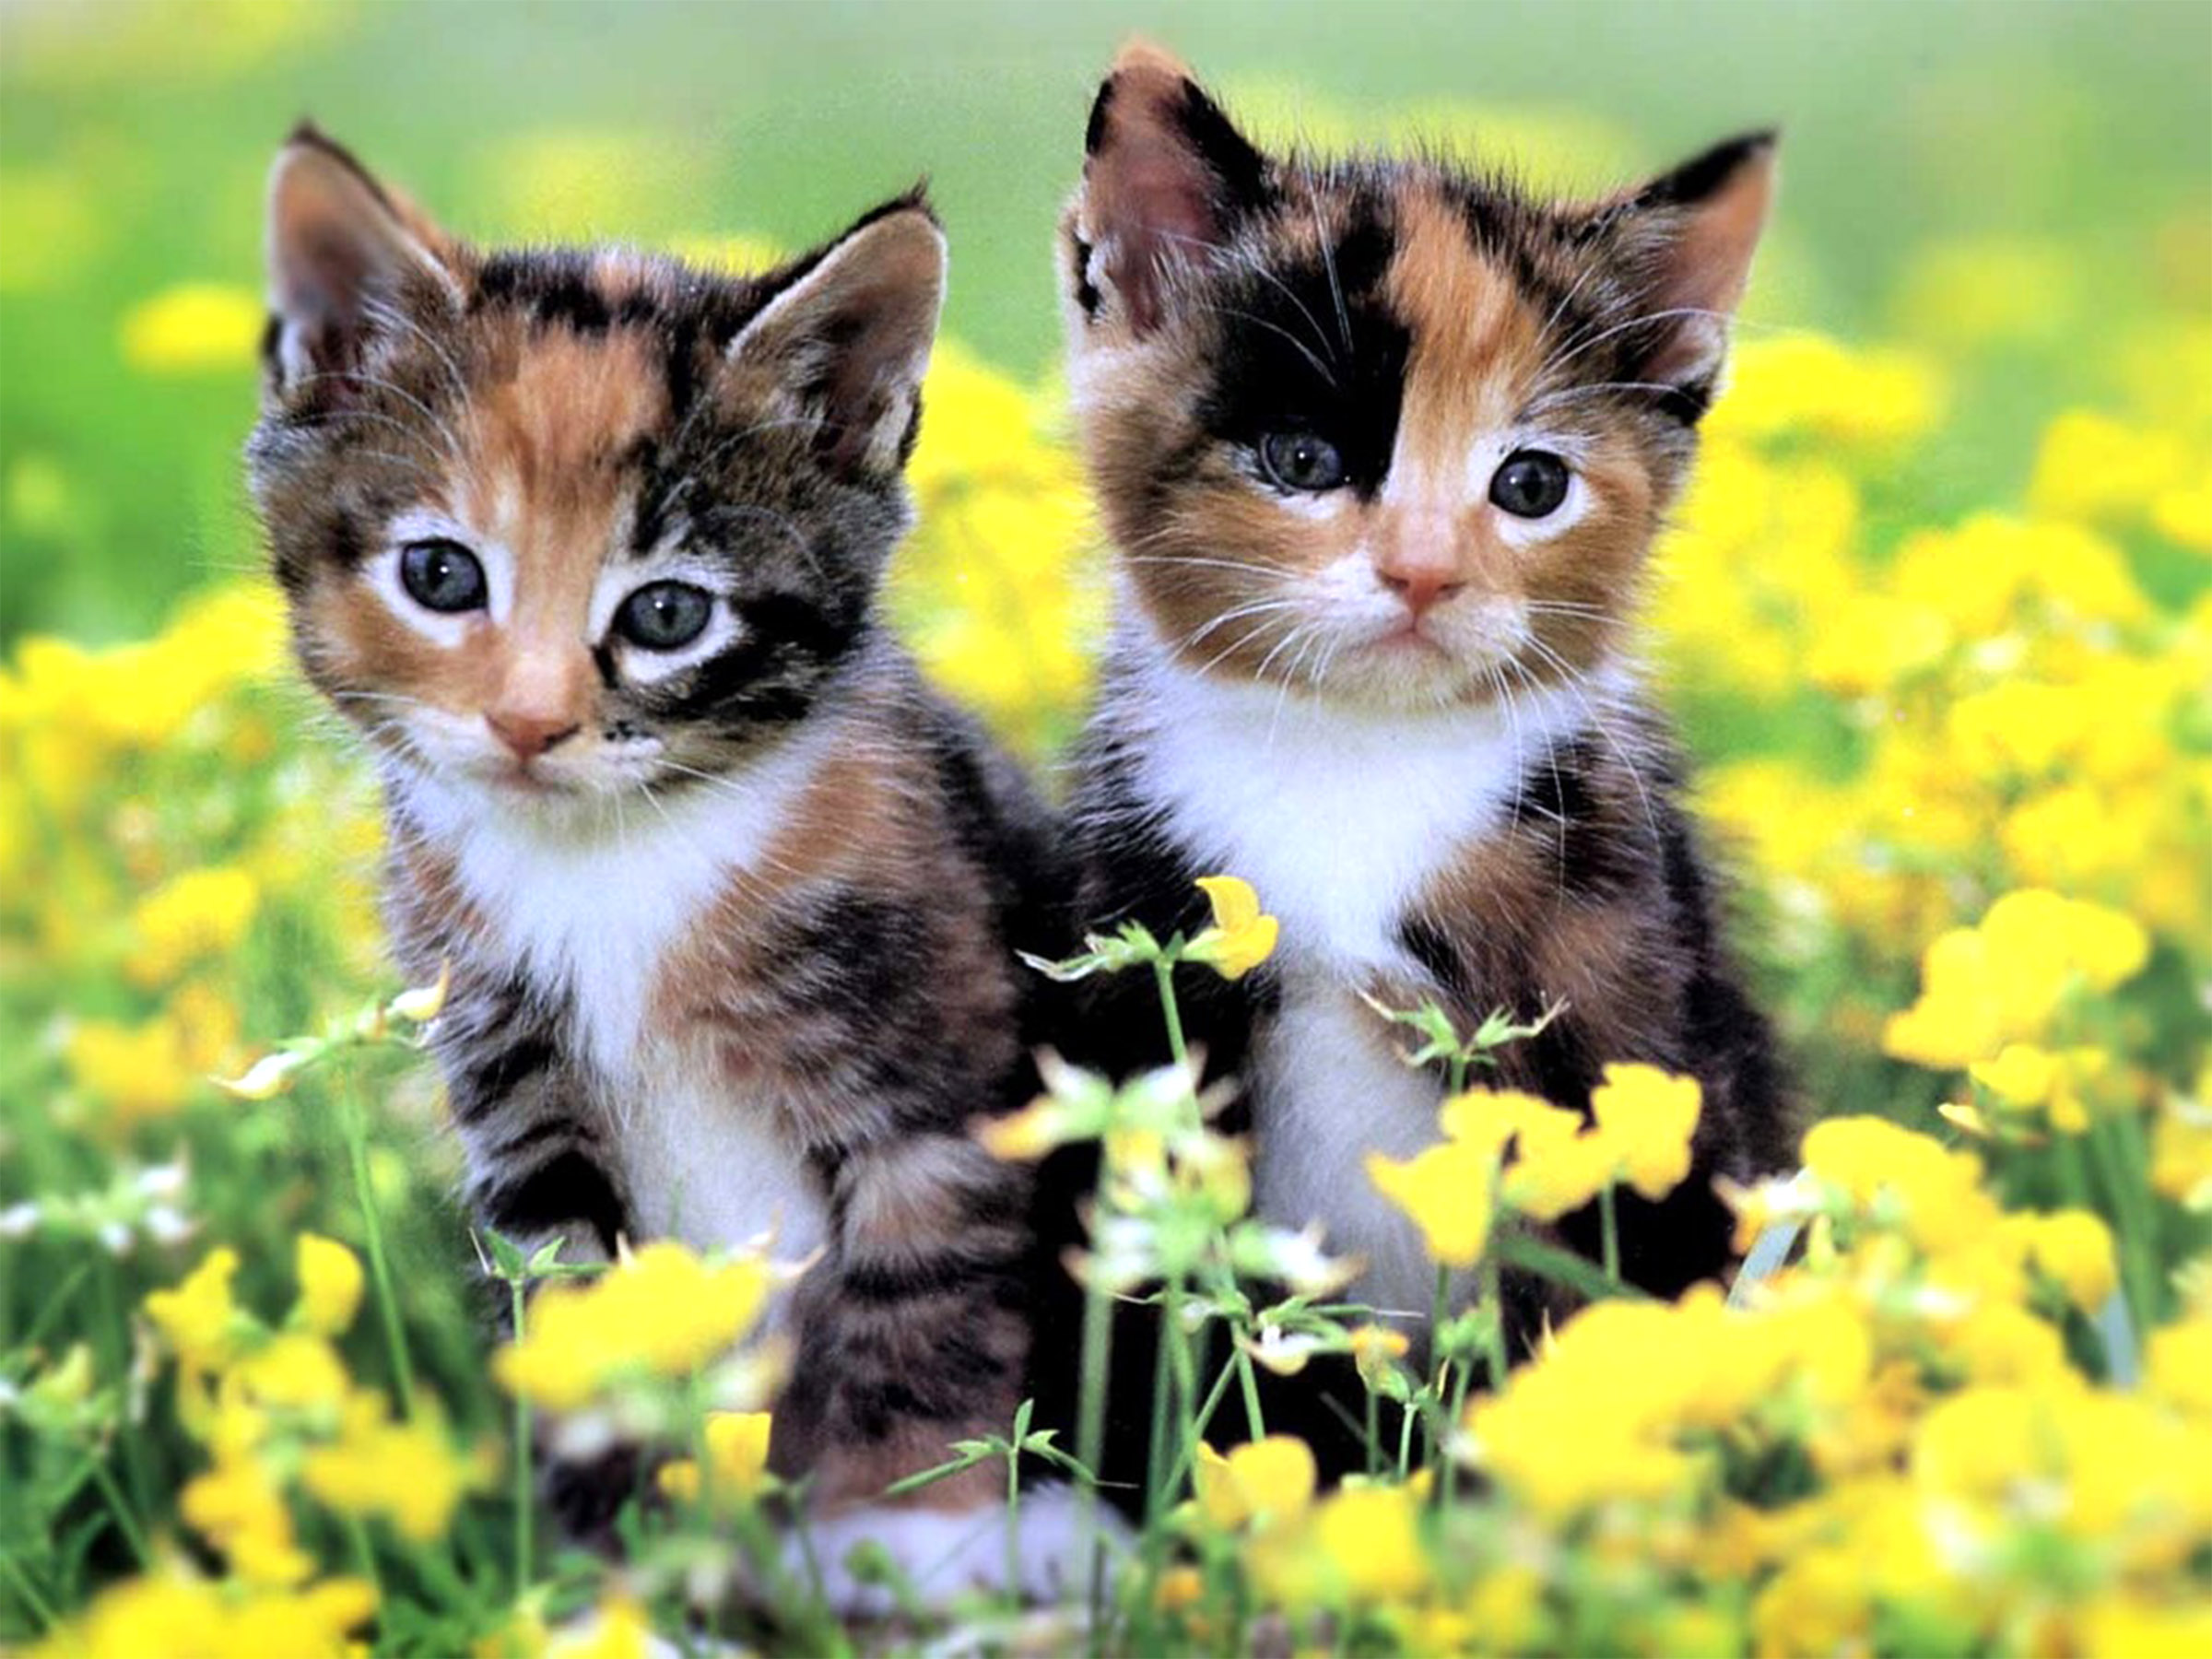 Two Kittens In Flower Field Full HD Wallpaper And Background